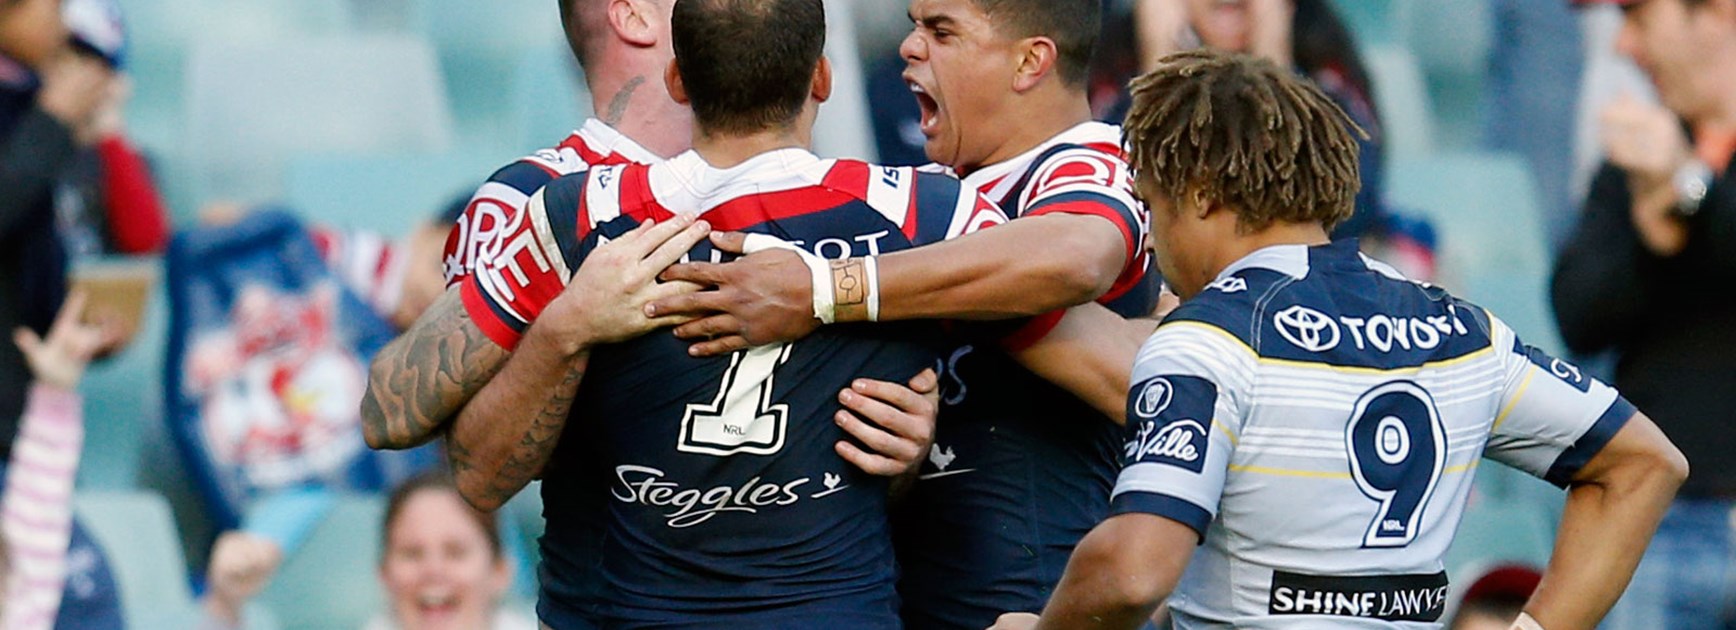 Roosters players celebrate against the Cowboys in Round 23.